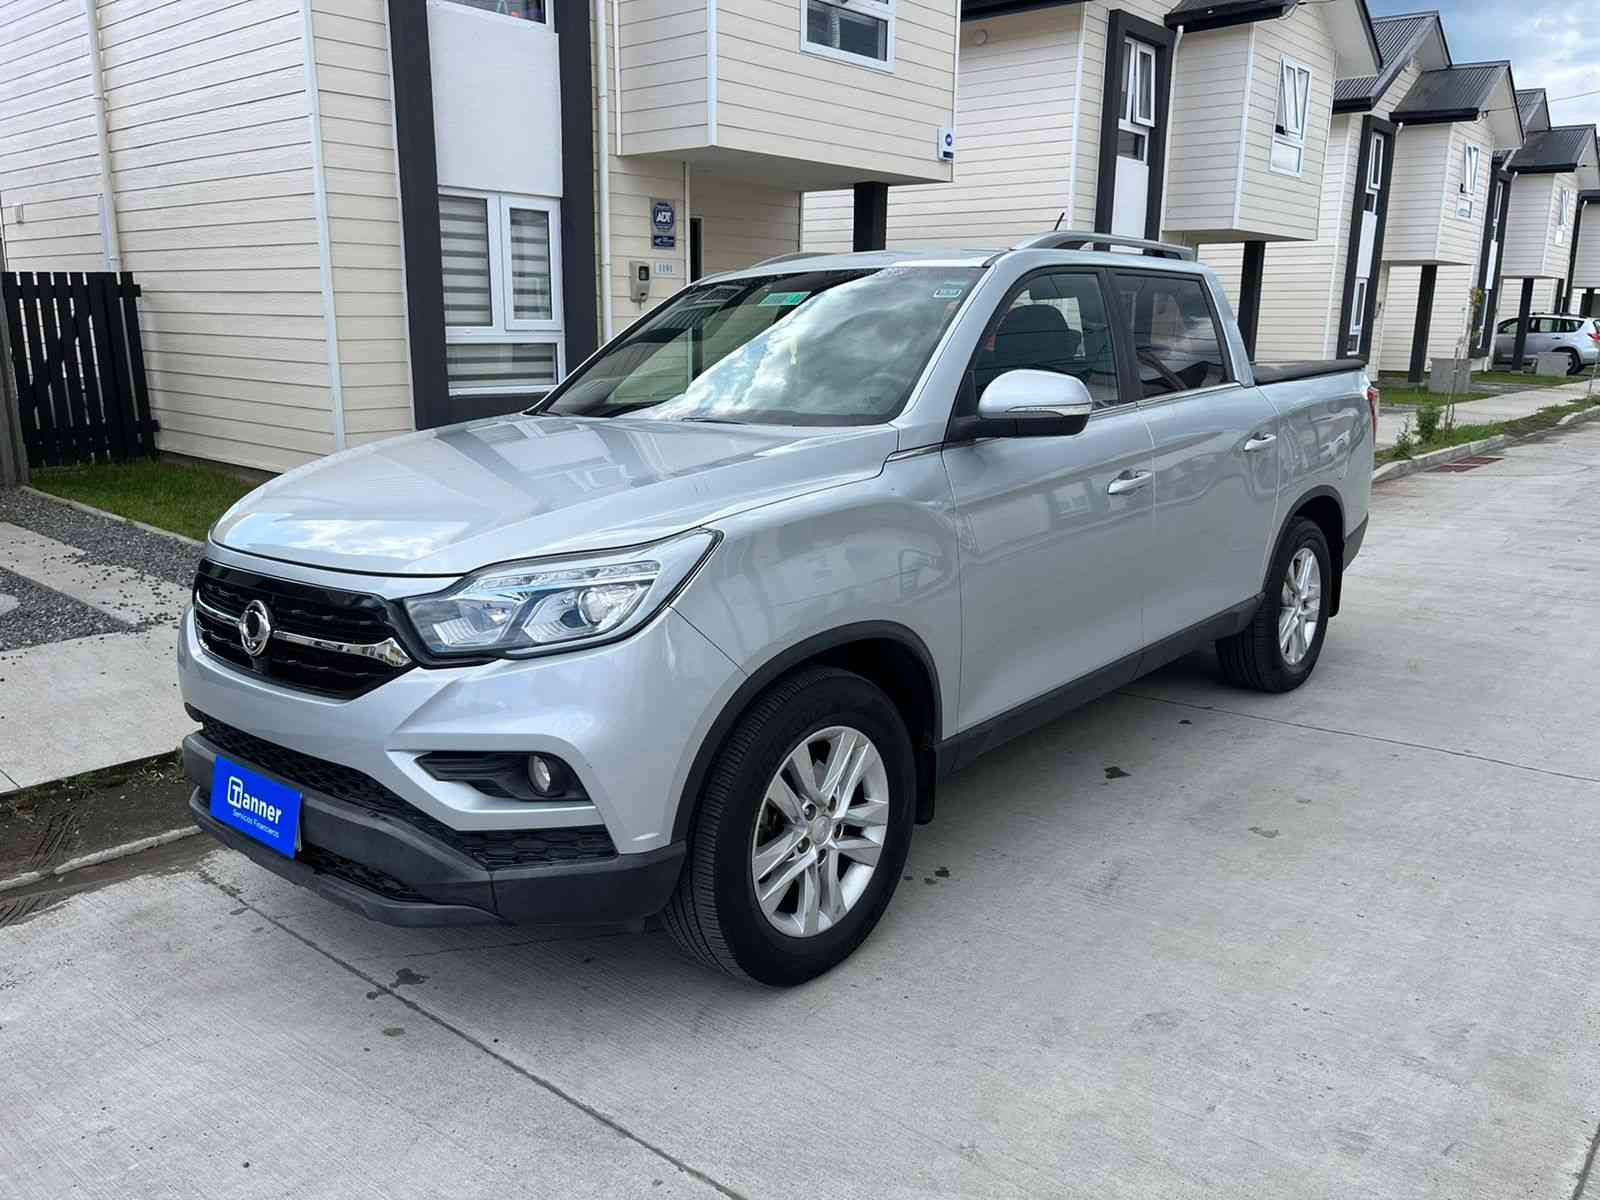 SSANGYONG MUSSO 4x4 